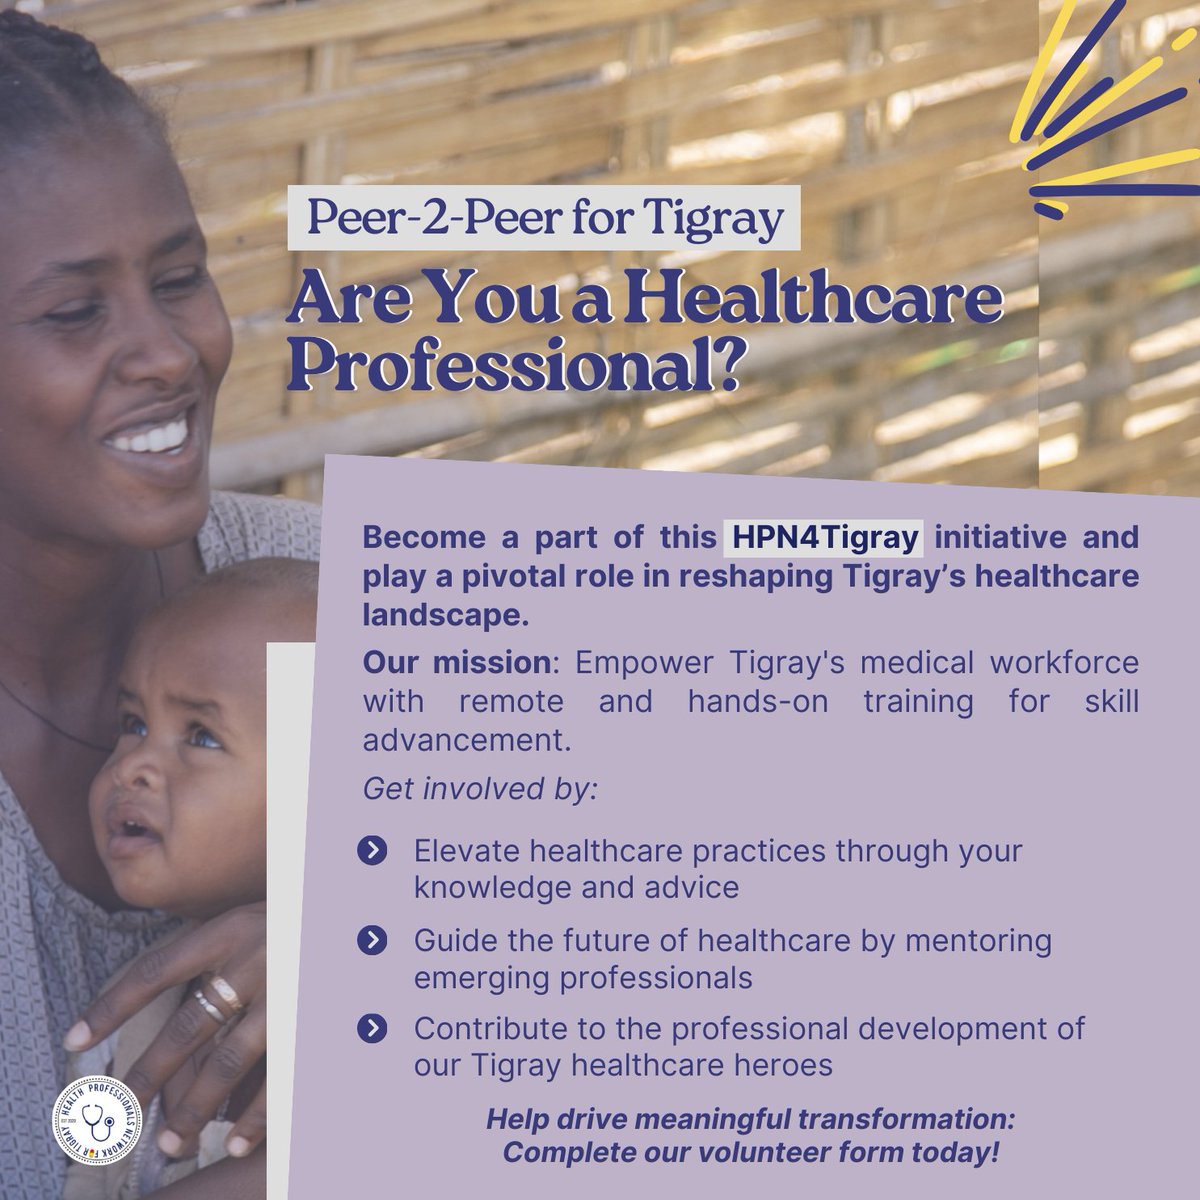 🩺Healthcare professionals, we need you! Step up for Tigray with our Peer-2-Peer initiative, where your experience can fortify the local healthcare fabric. Join us, whether on the ground or remotely. Fill out this form👇🏿to begin—questions answered within! docs.google.com/forms/d/1-dzYk…